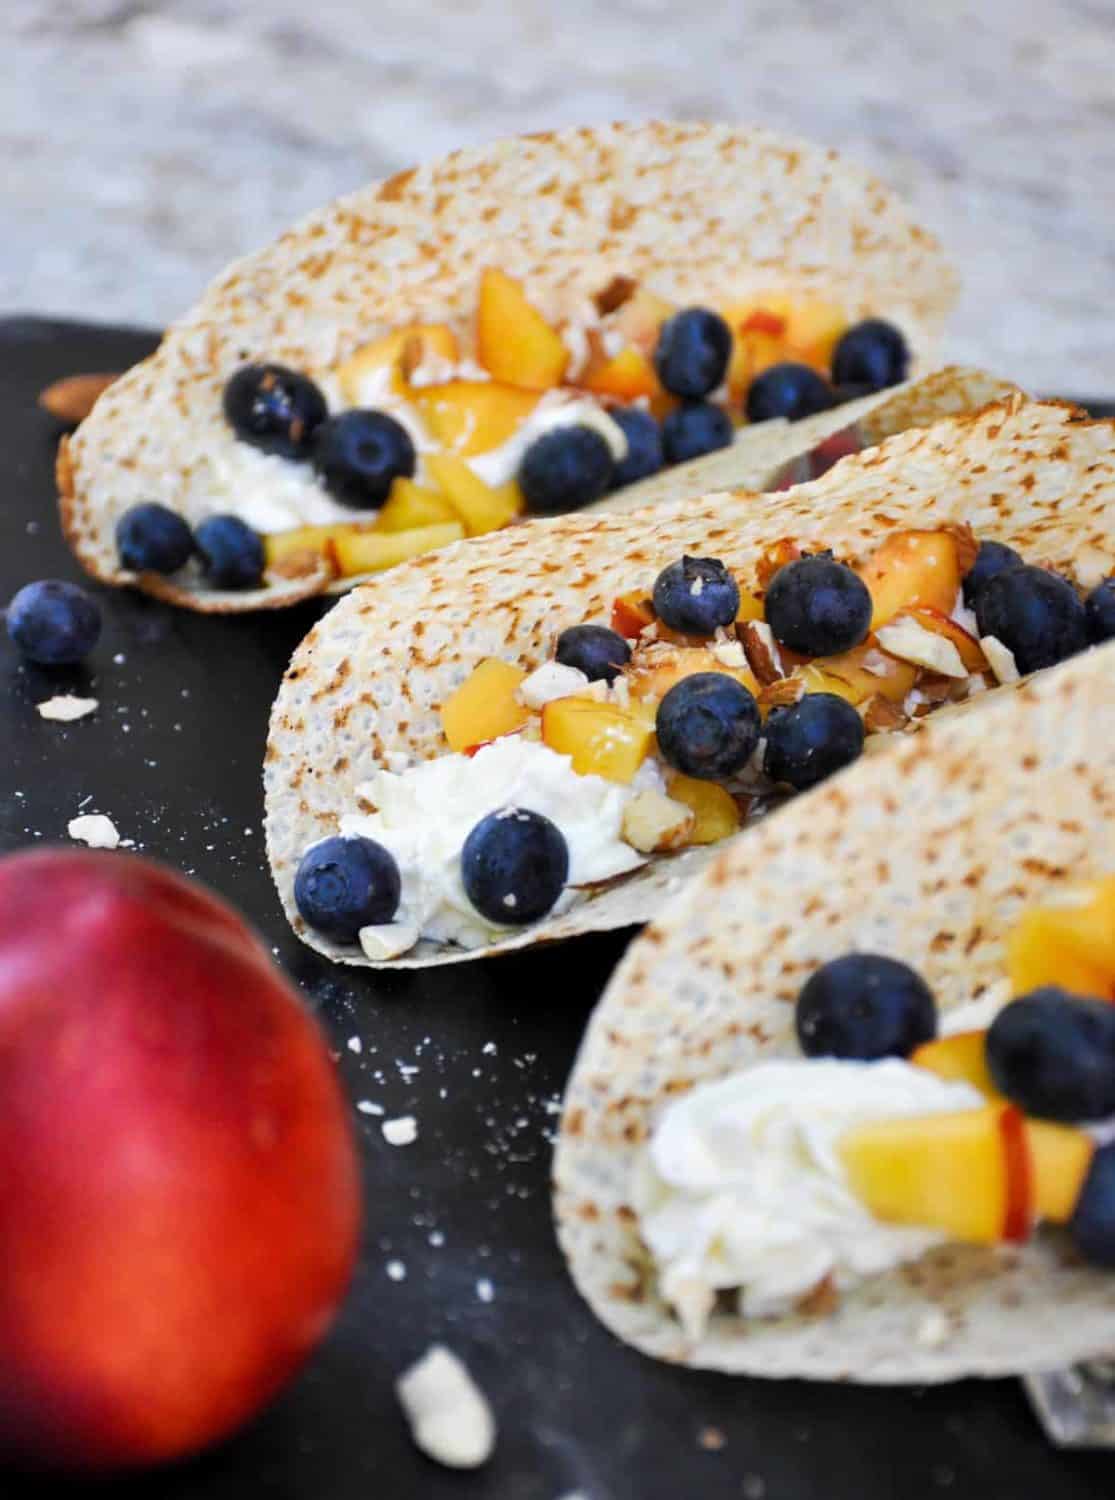 Desert Tacos with Blueberries and nectarines